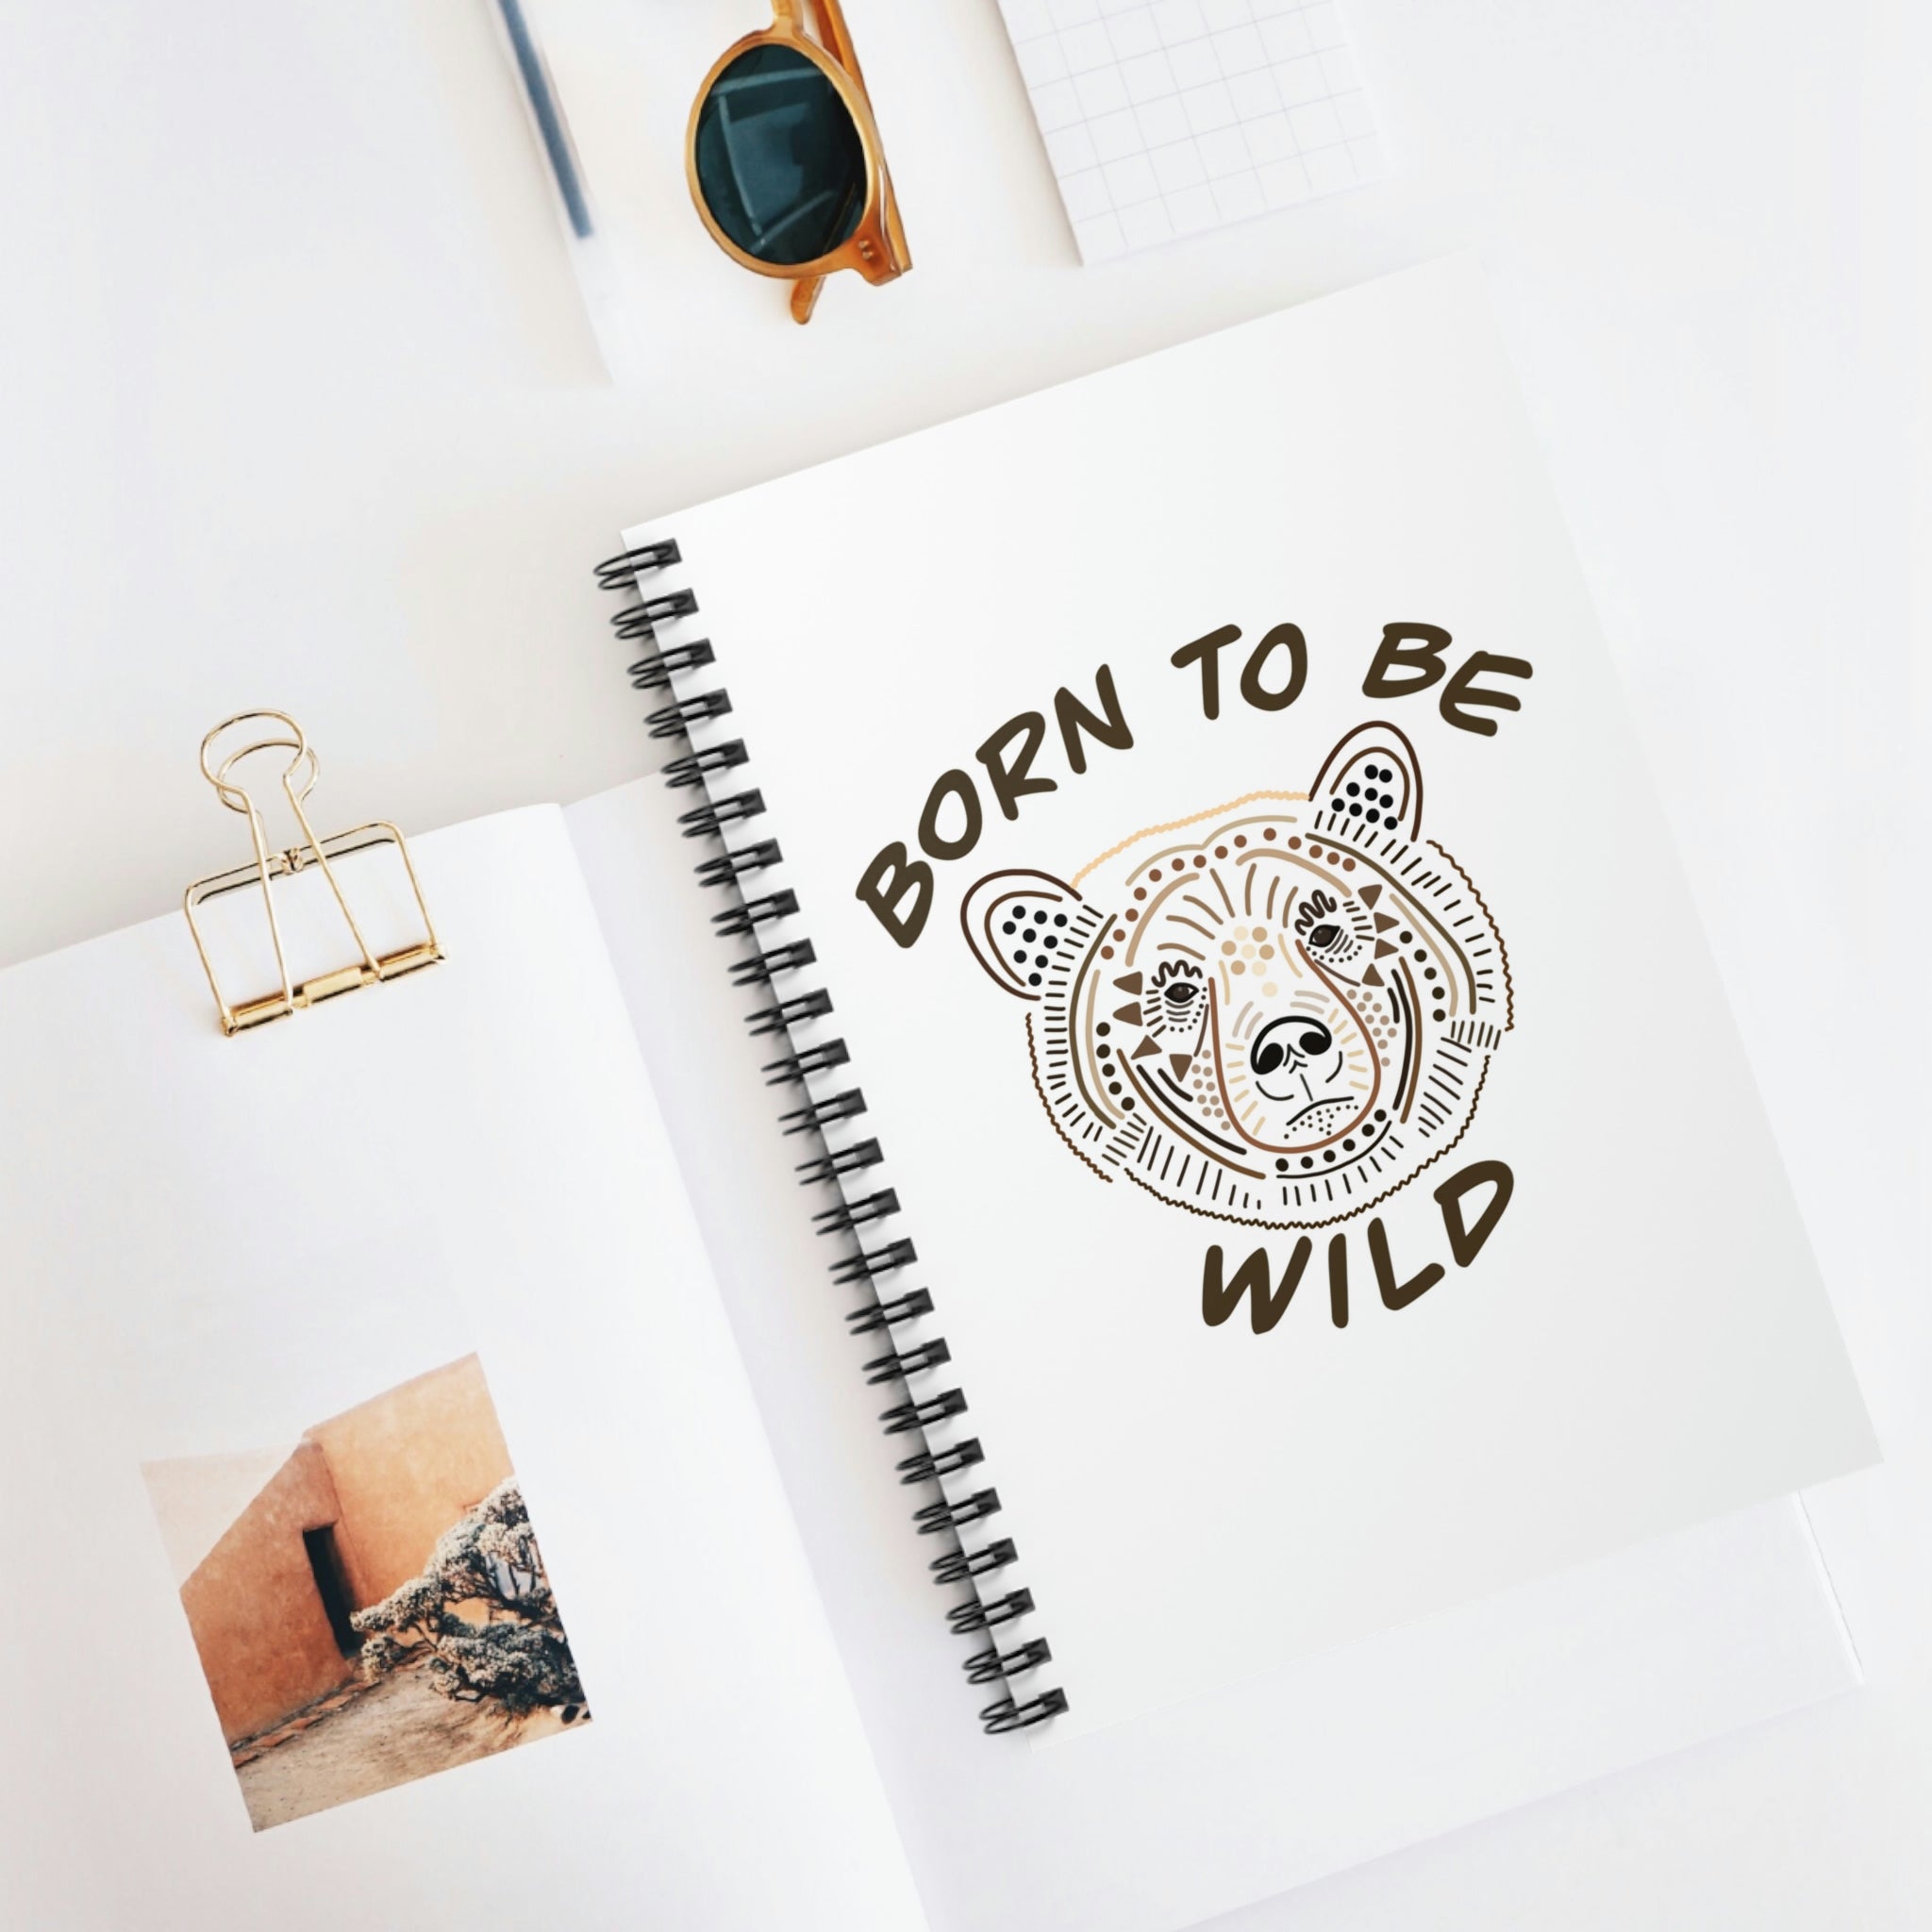 Born To Be Wild Spiral Notebook - Ruled Line